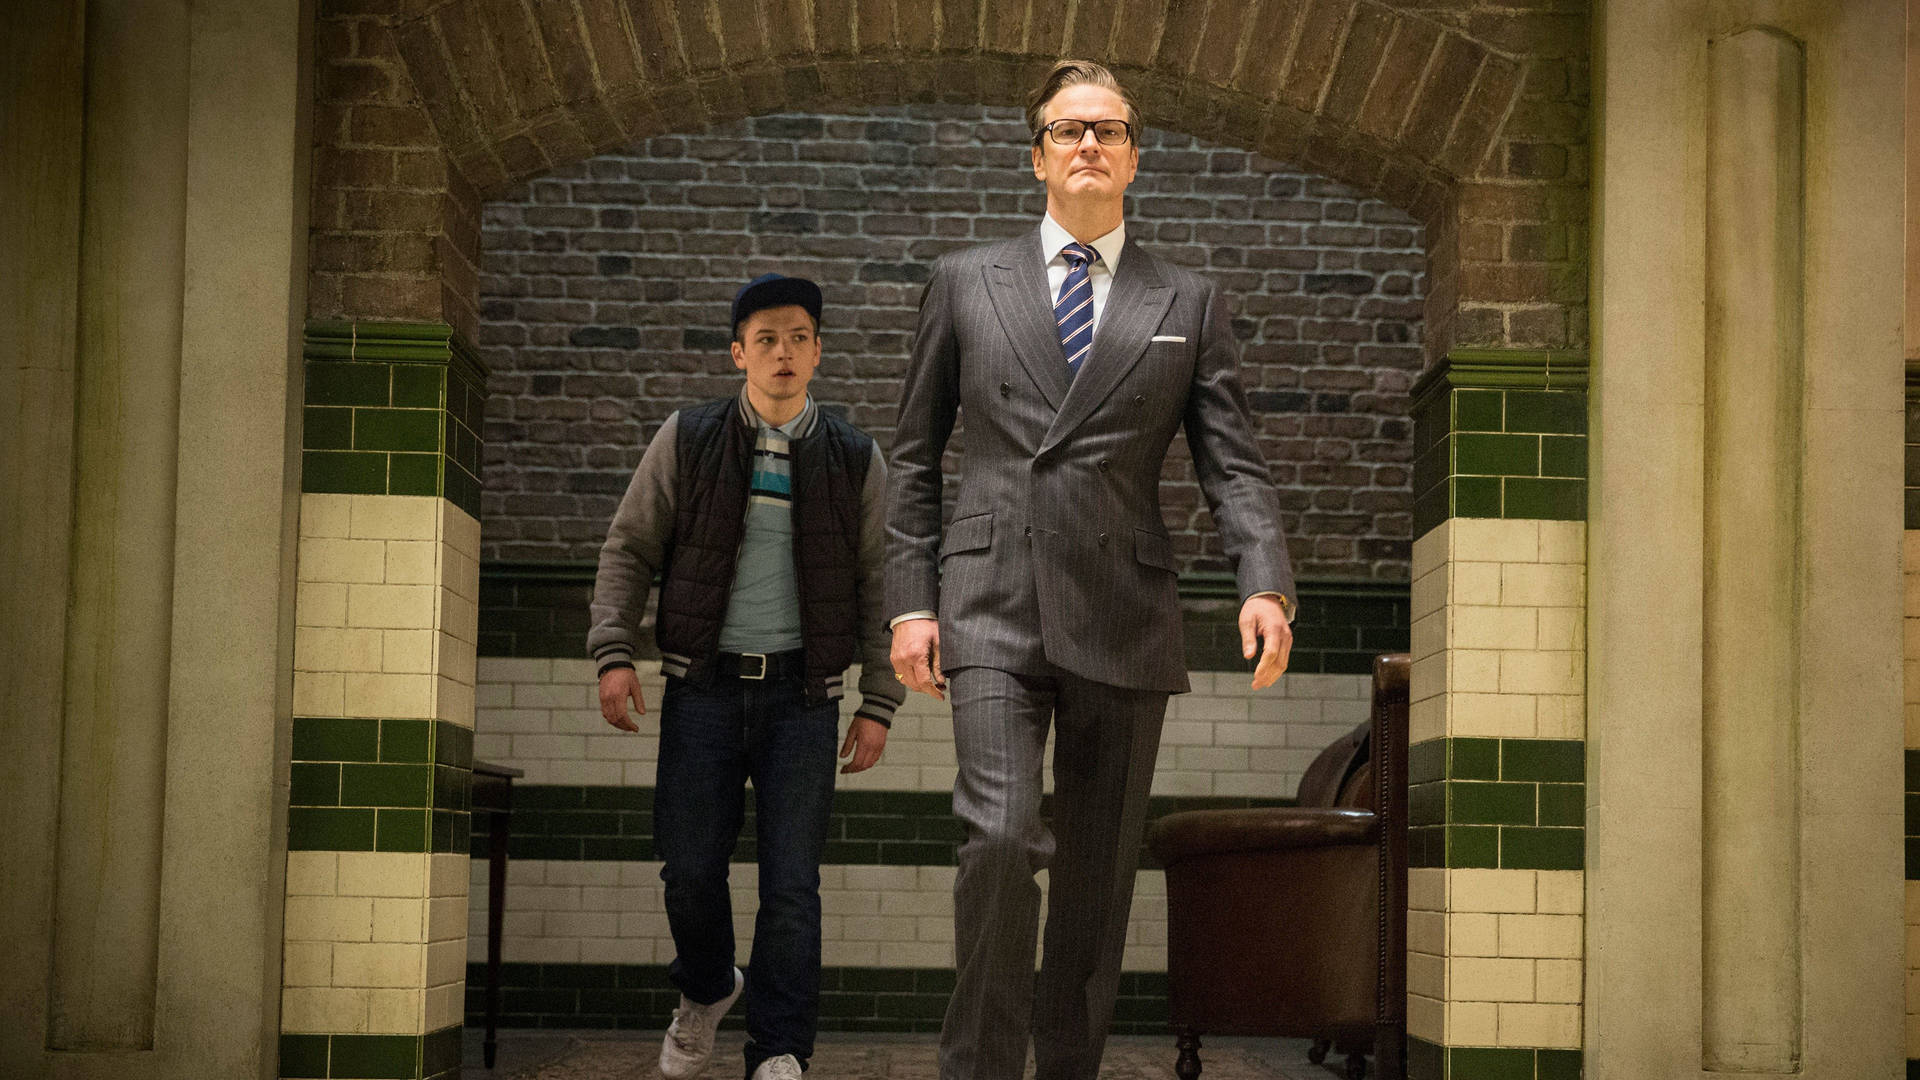 The Audacious Agents of Kingsman in Action Wallpaper